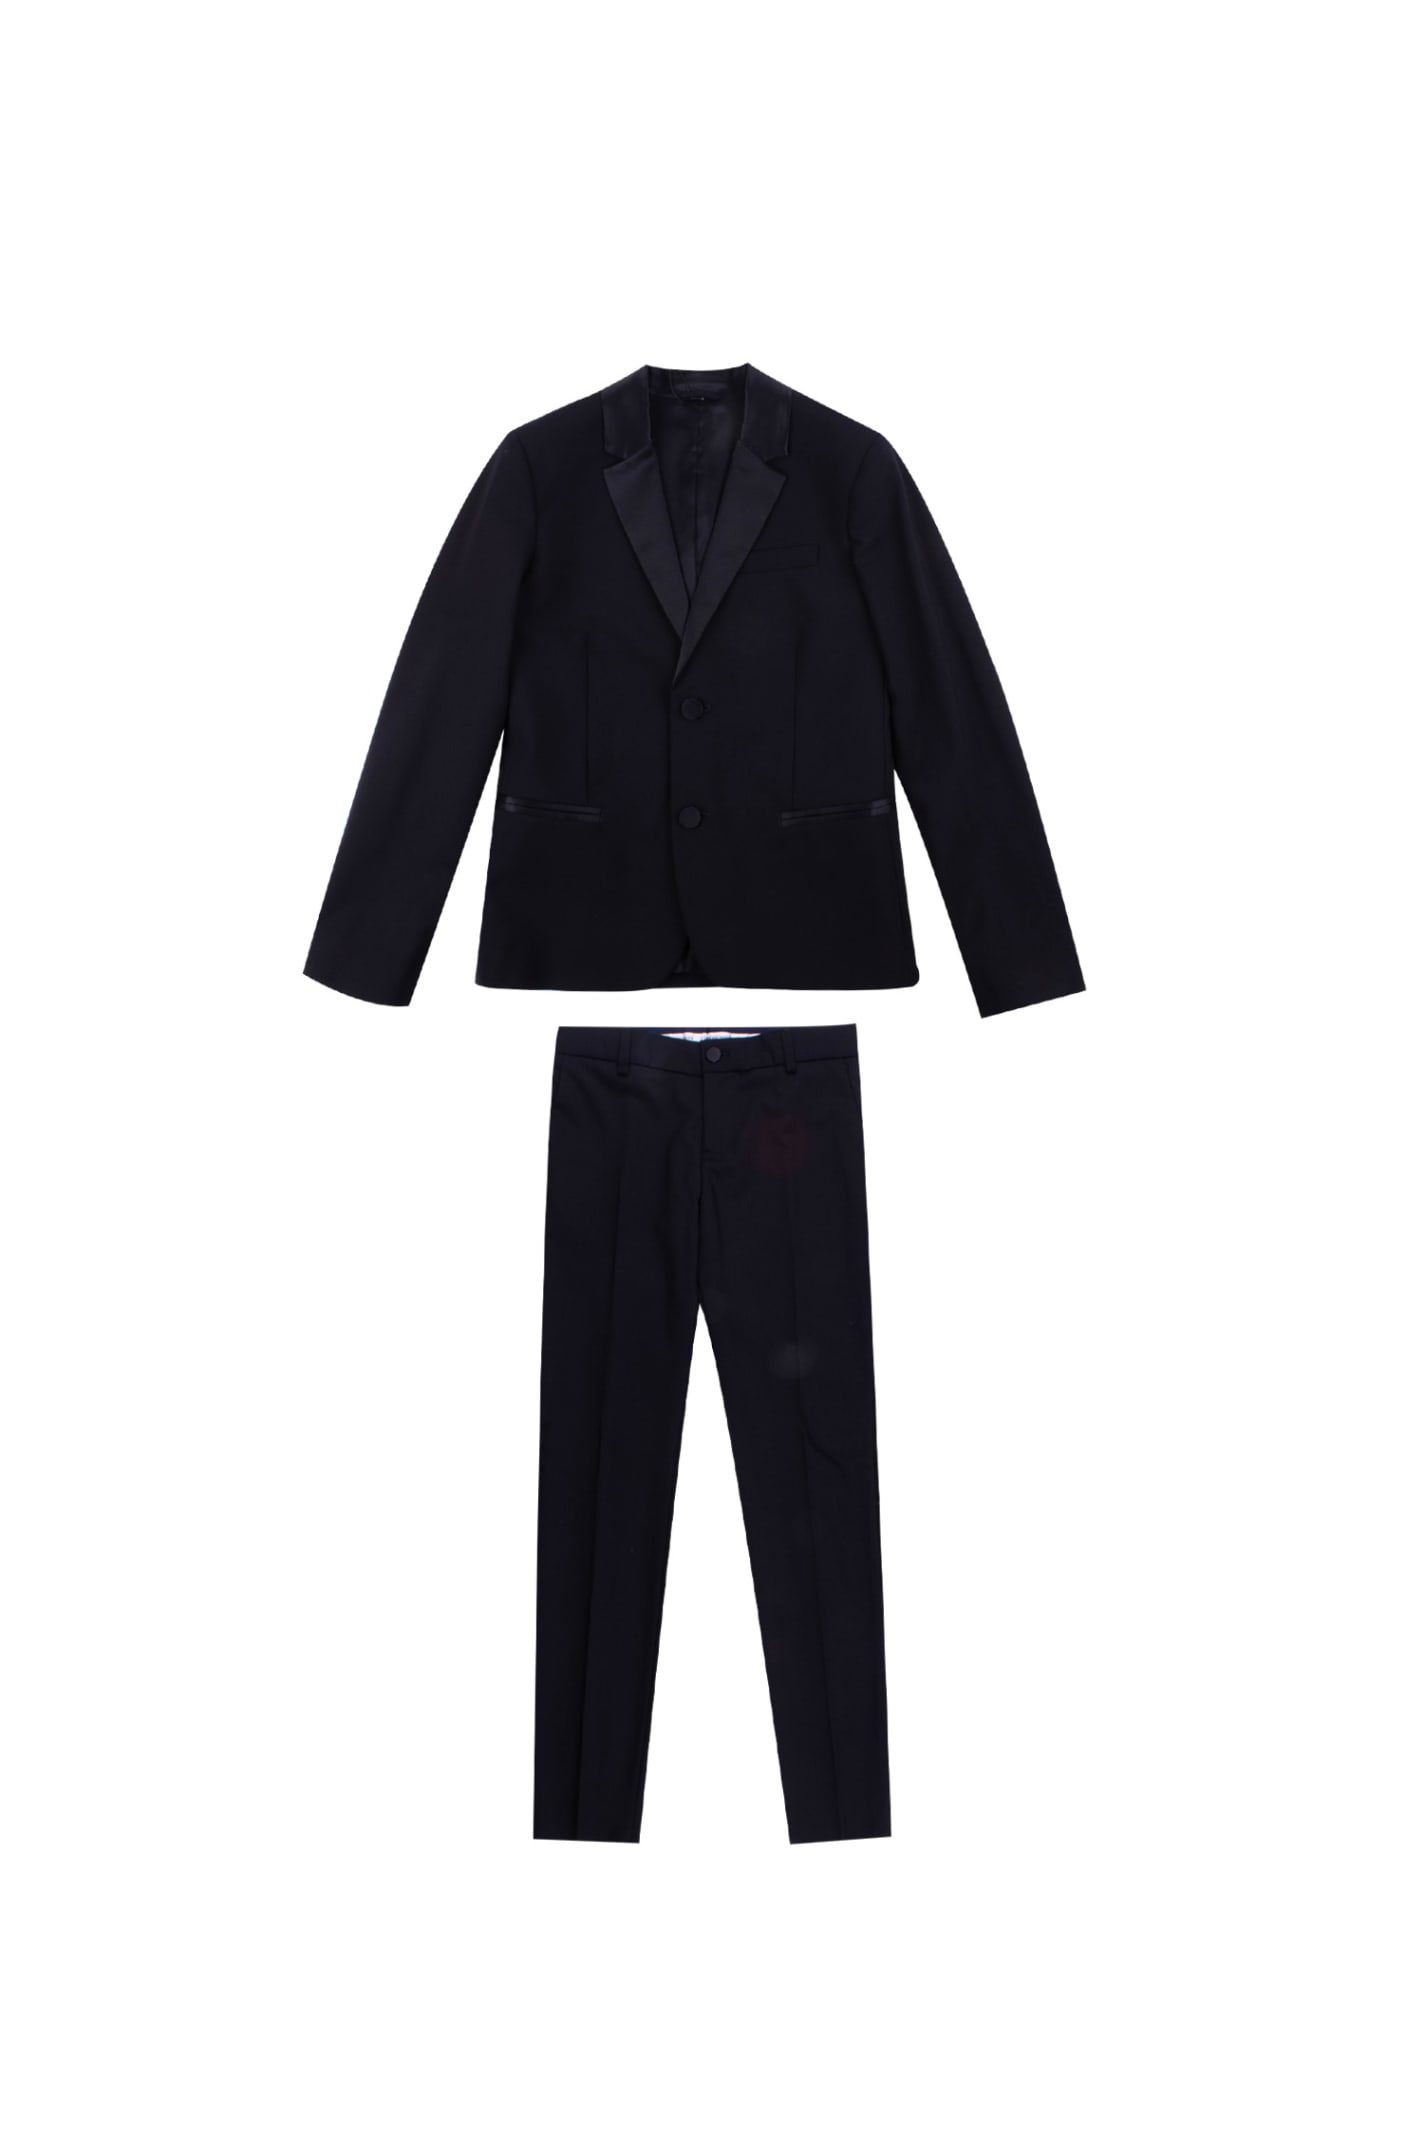 Emporio Armani Kids' Wool Blend Jacket And Pants In Back